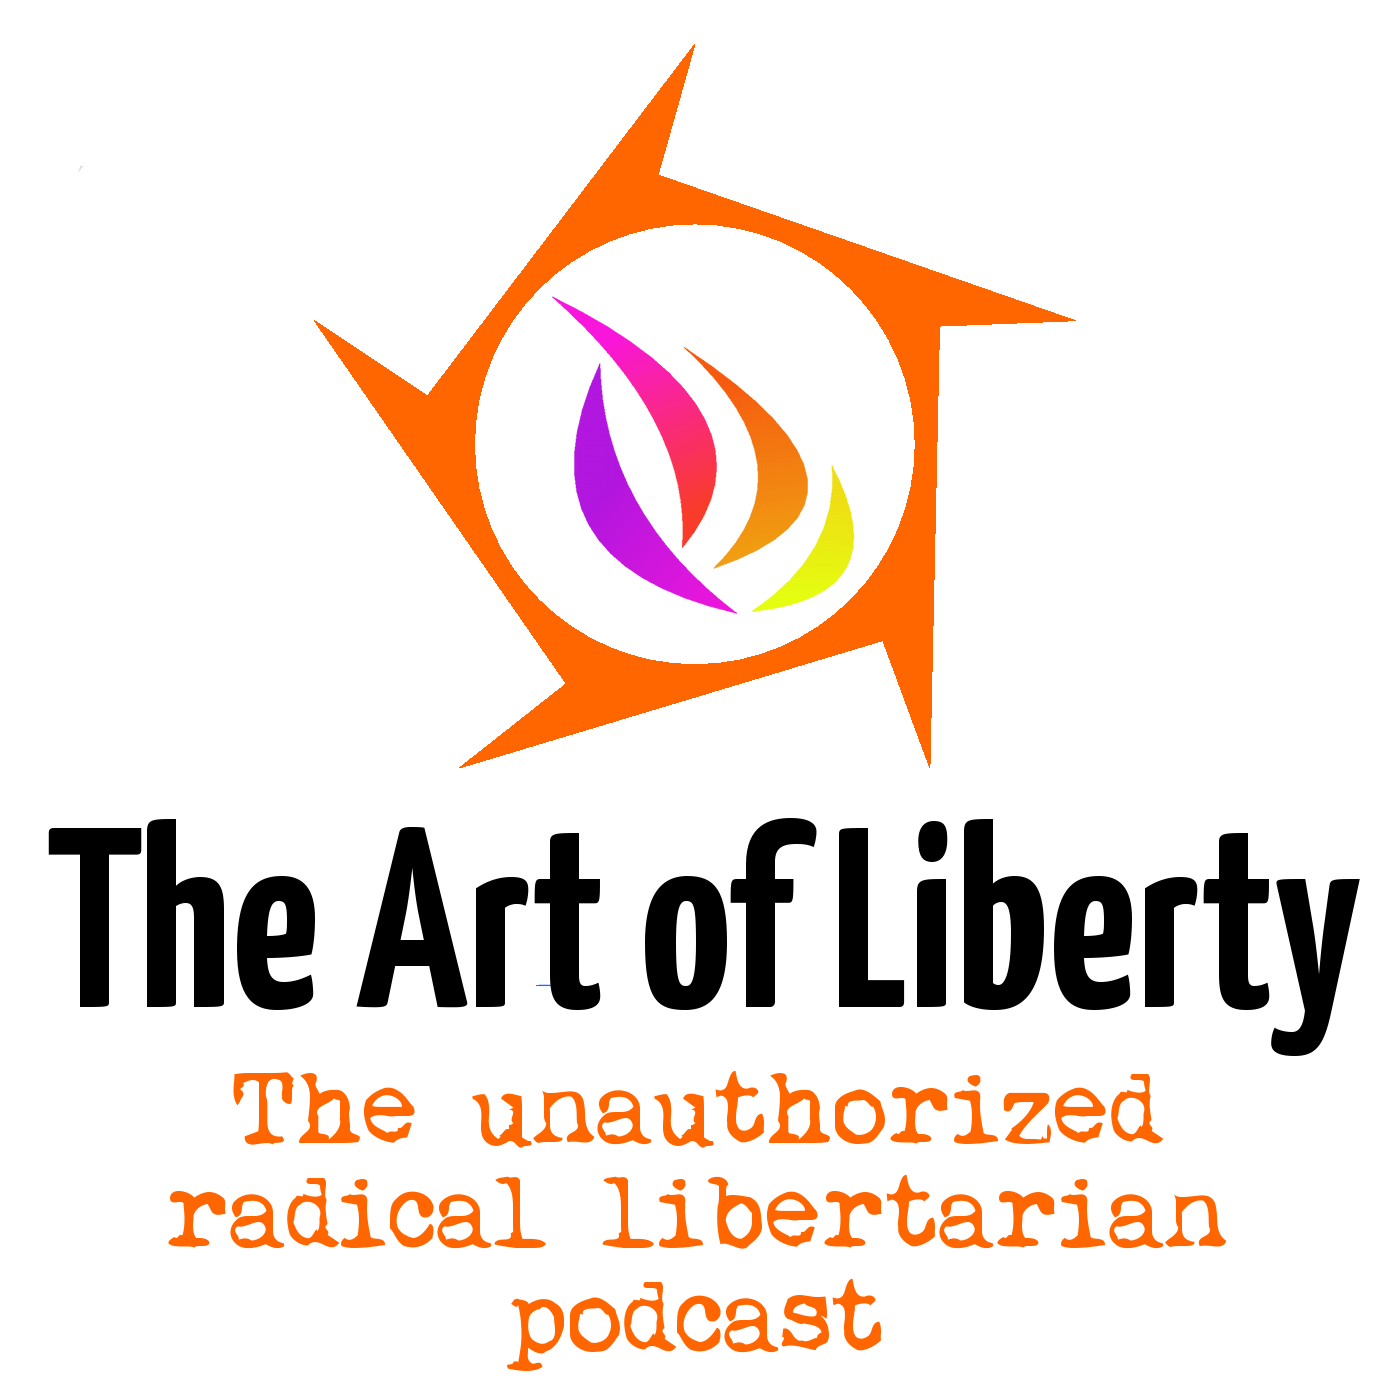 The Art of Liberty - the unauthorized radical libertarian podcast